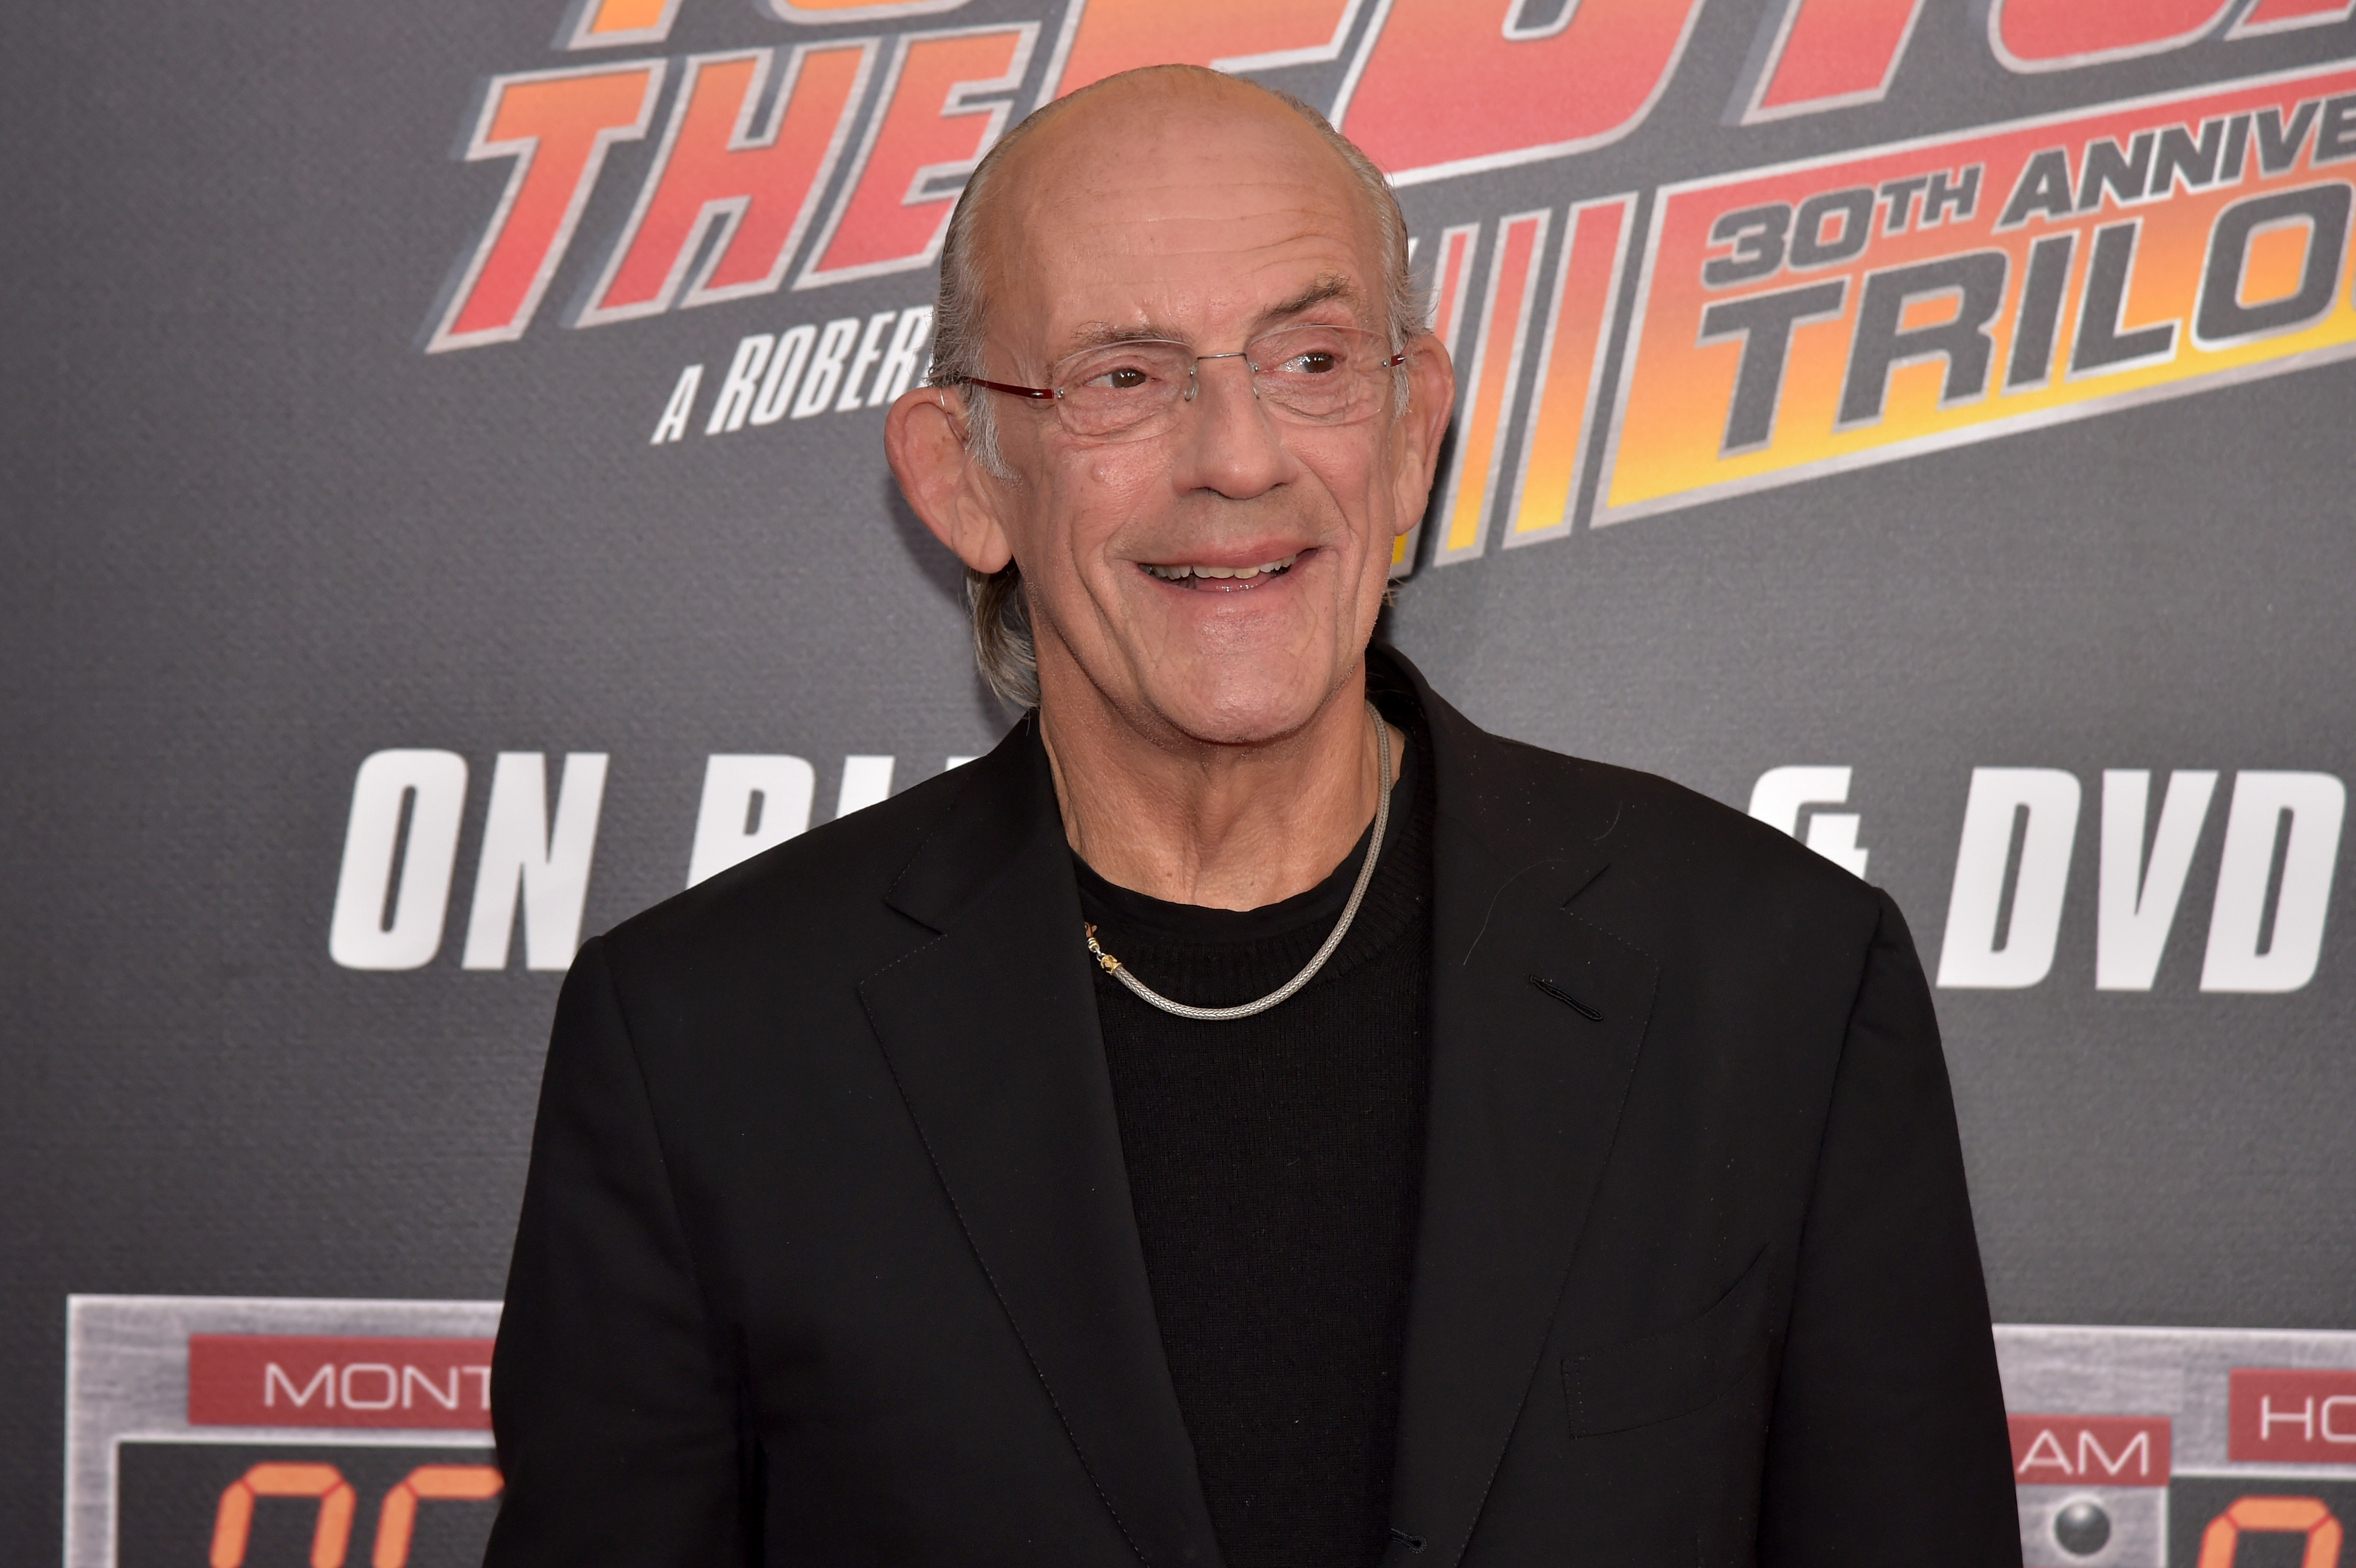 Christopher Lloyd 'Rick and Morty' at Back to the Future Premiere wearing all black